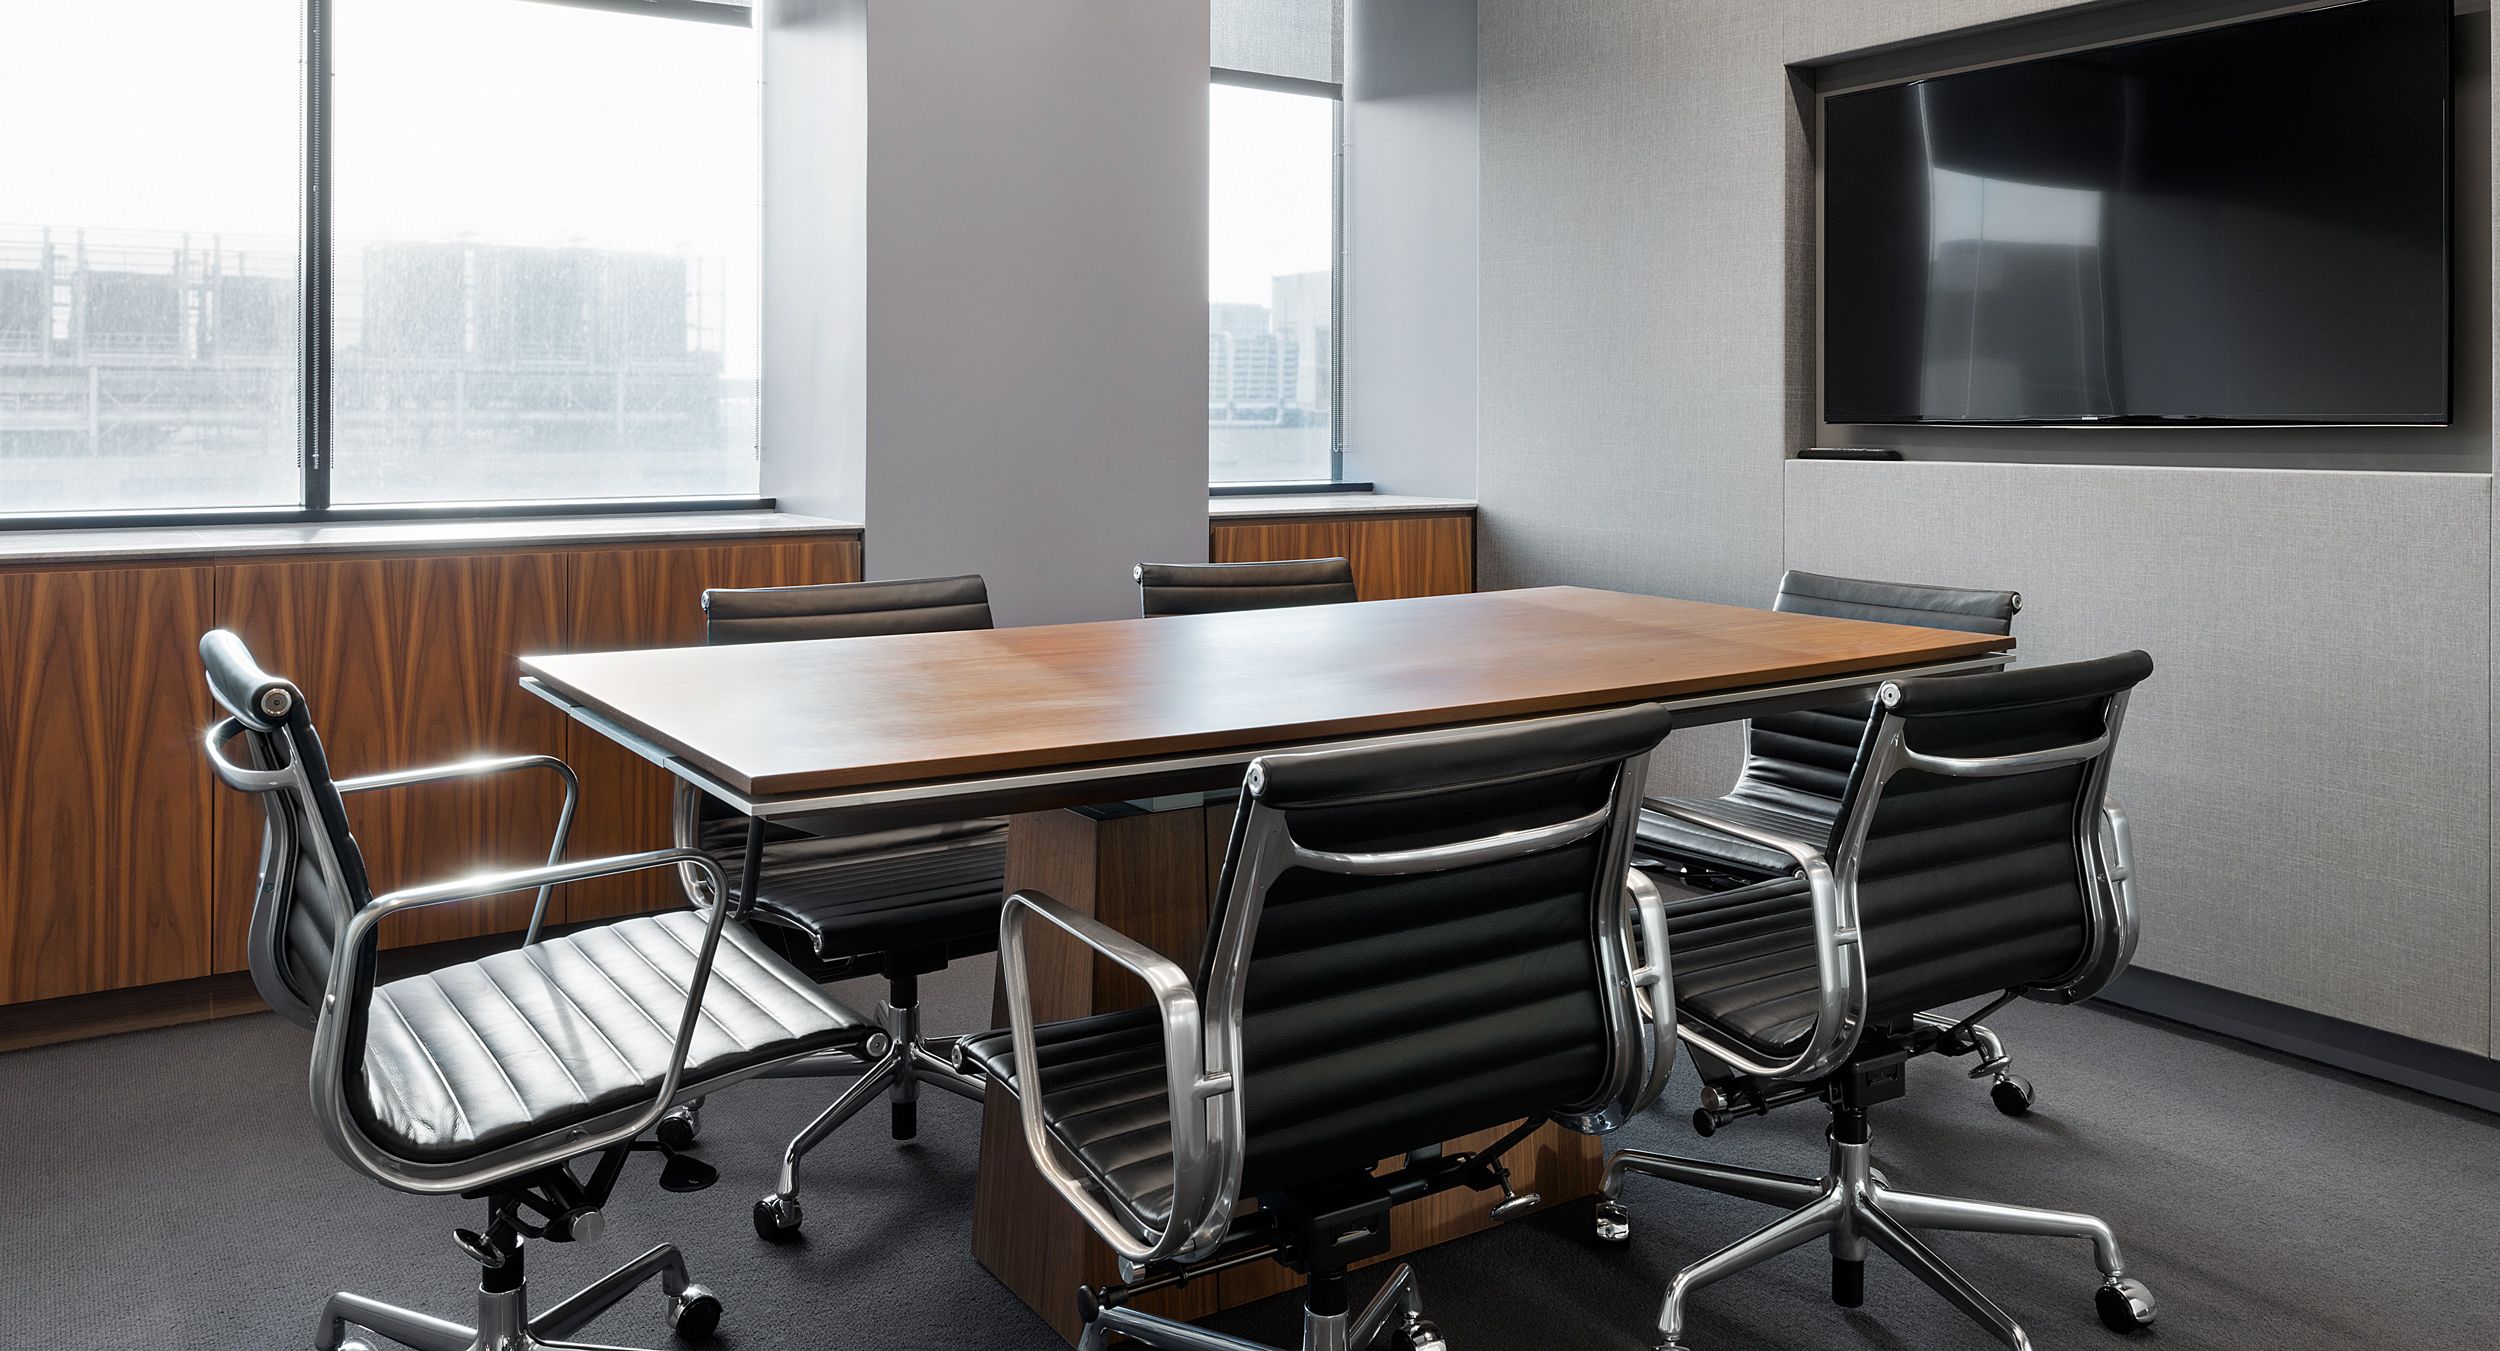 MESA tables were provided in sizes to fit a range of meeting spaces.